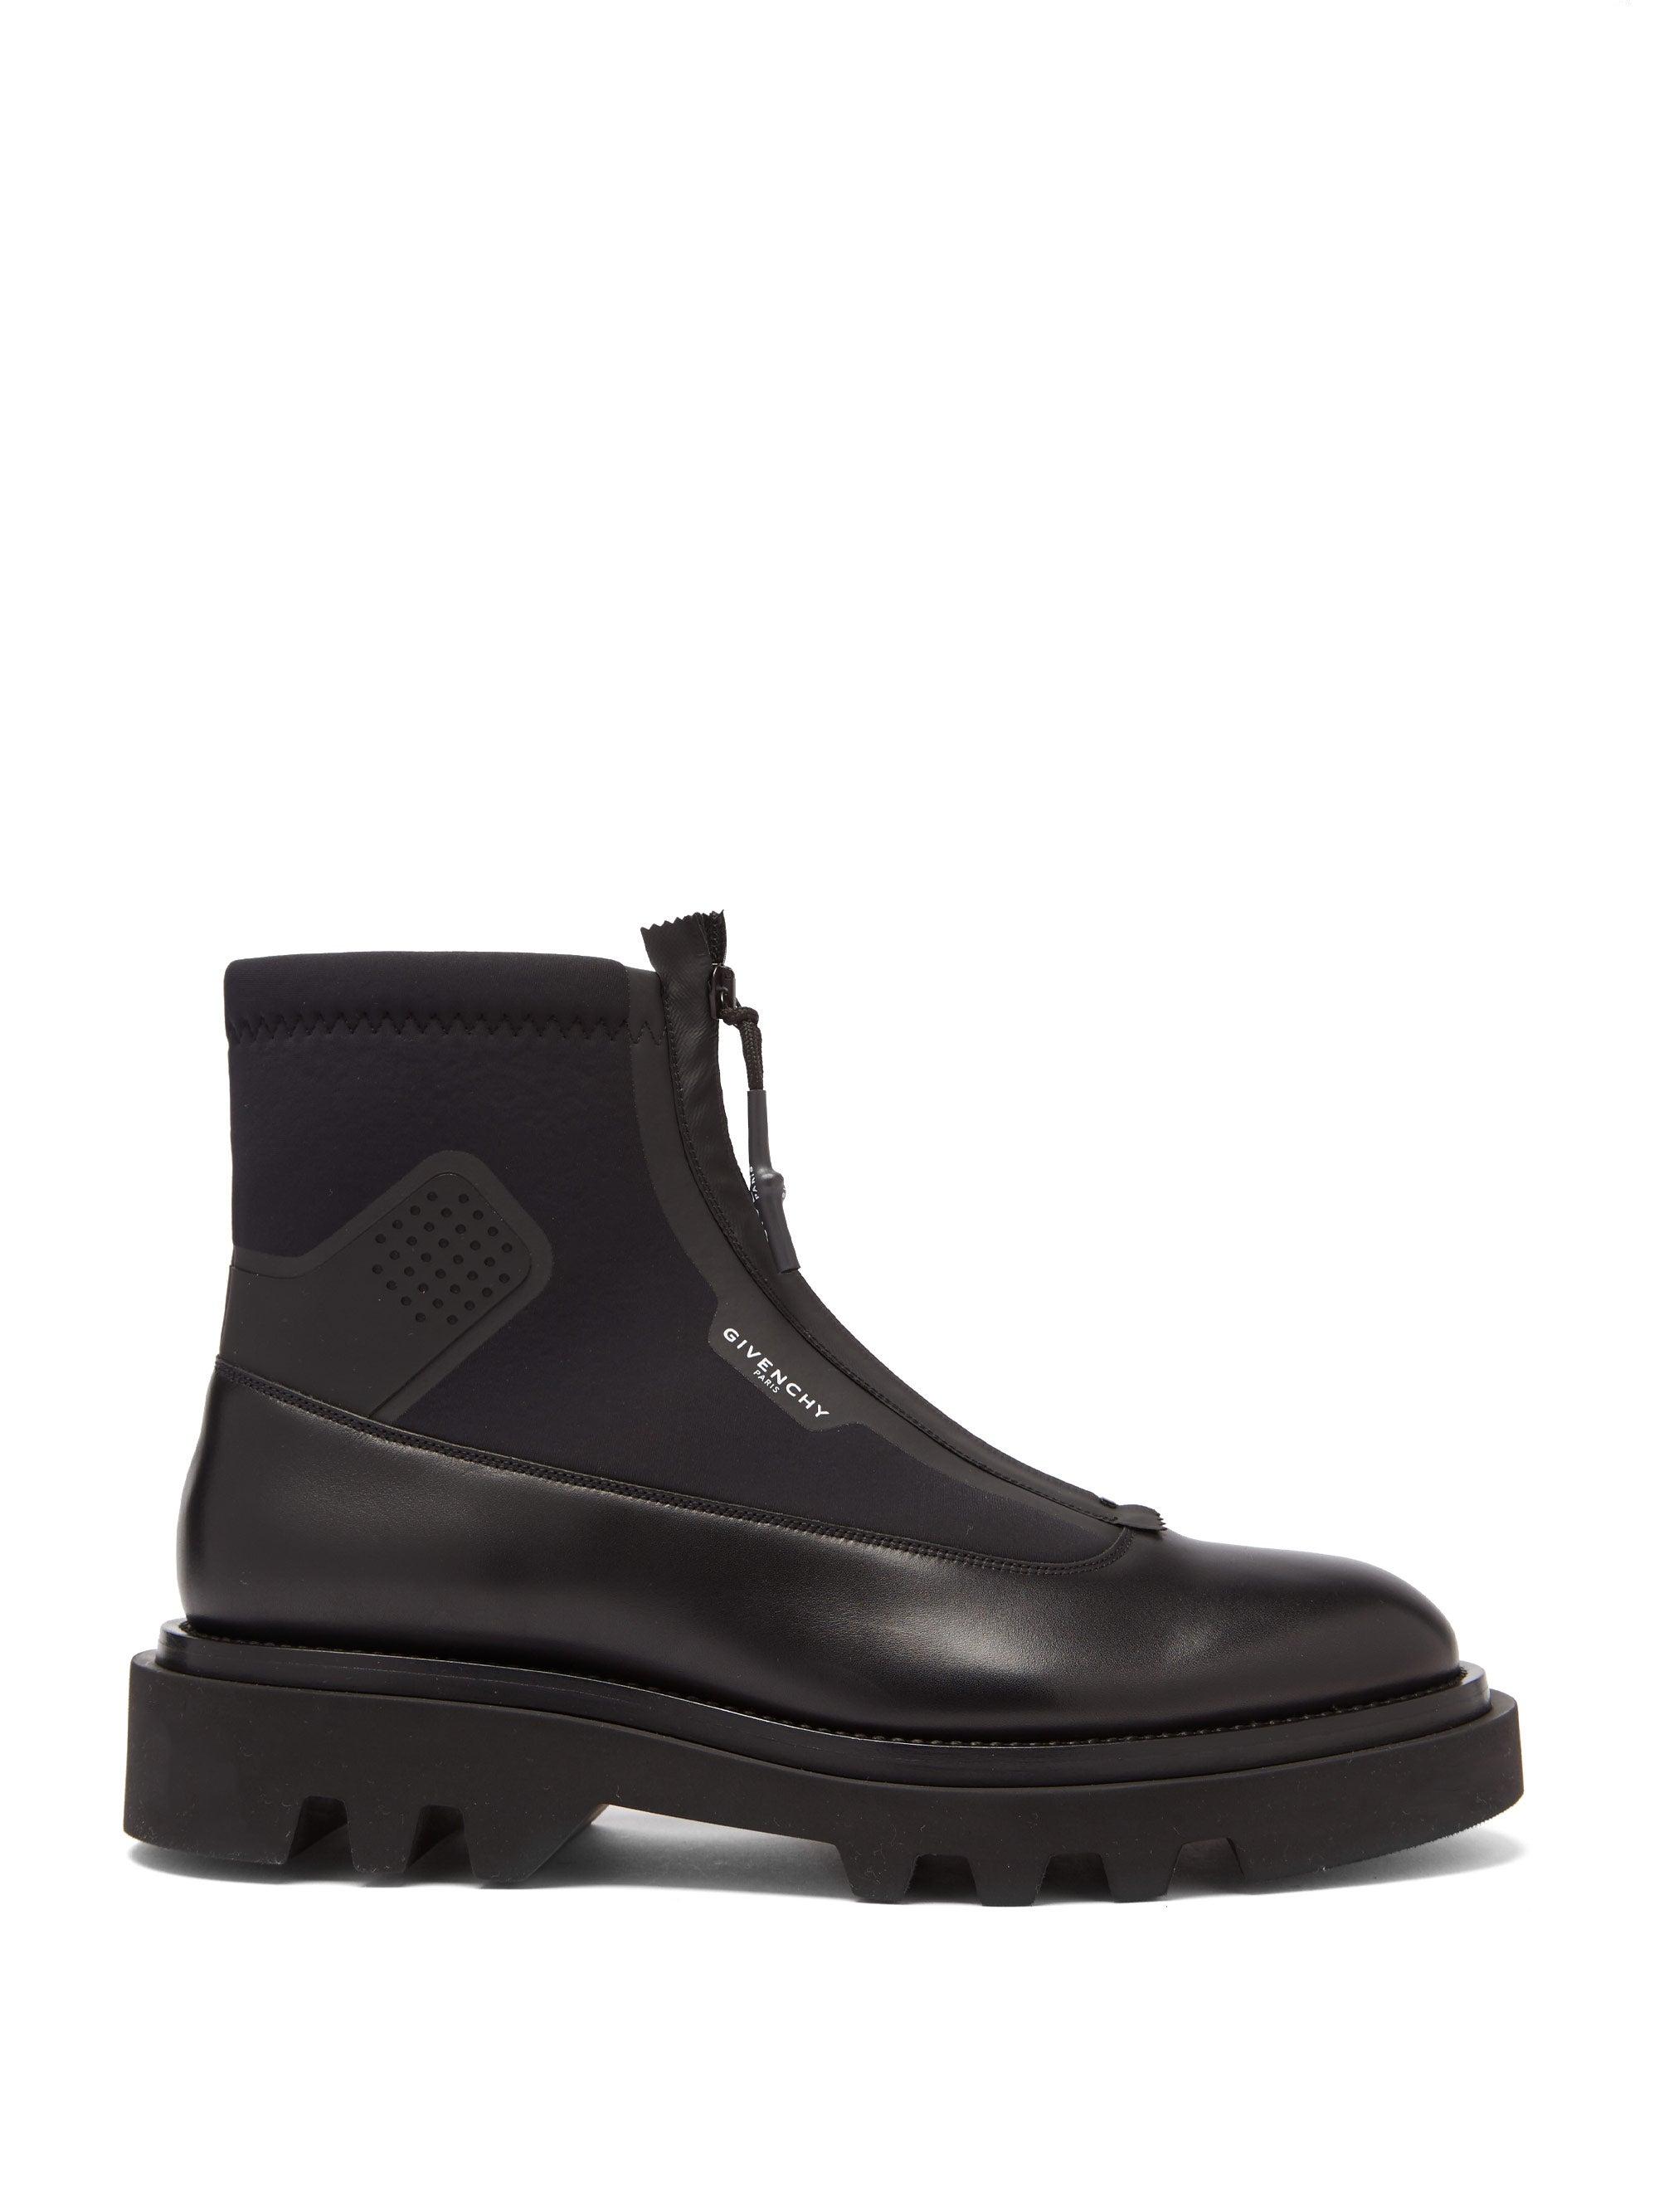 Givenchy Neoprene And Leather Combat Boots in Black for Men - Lyst